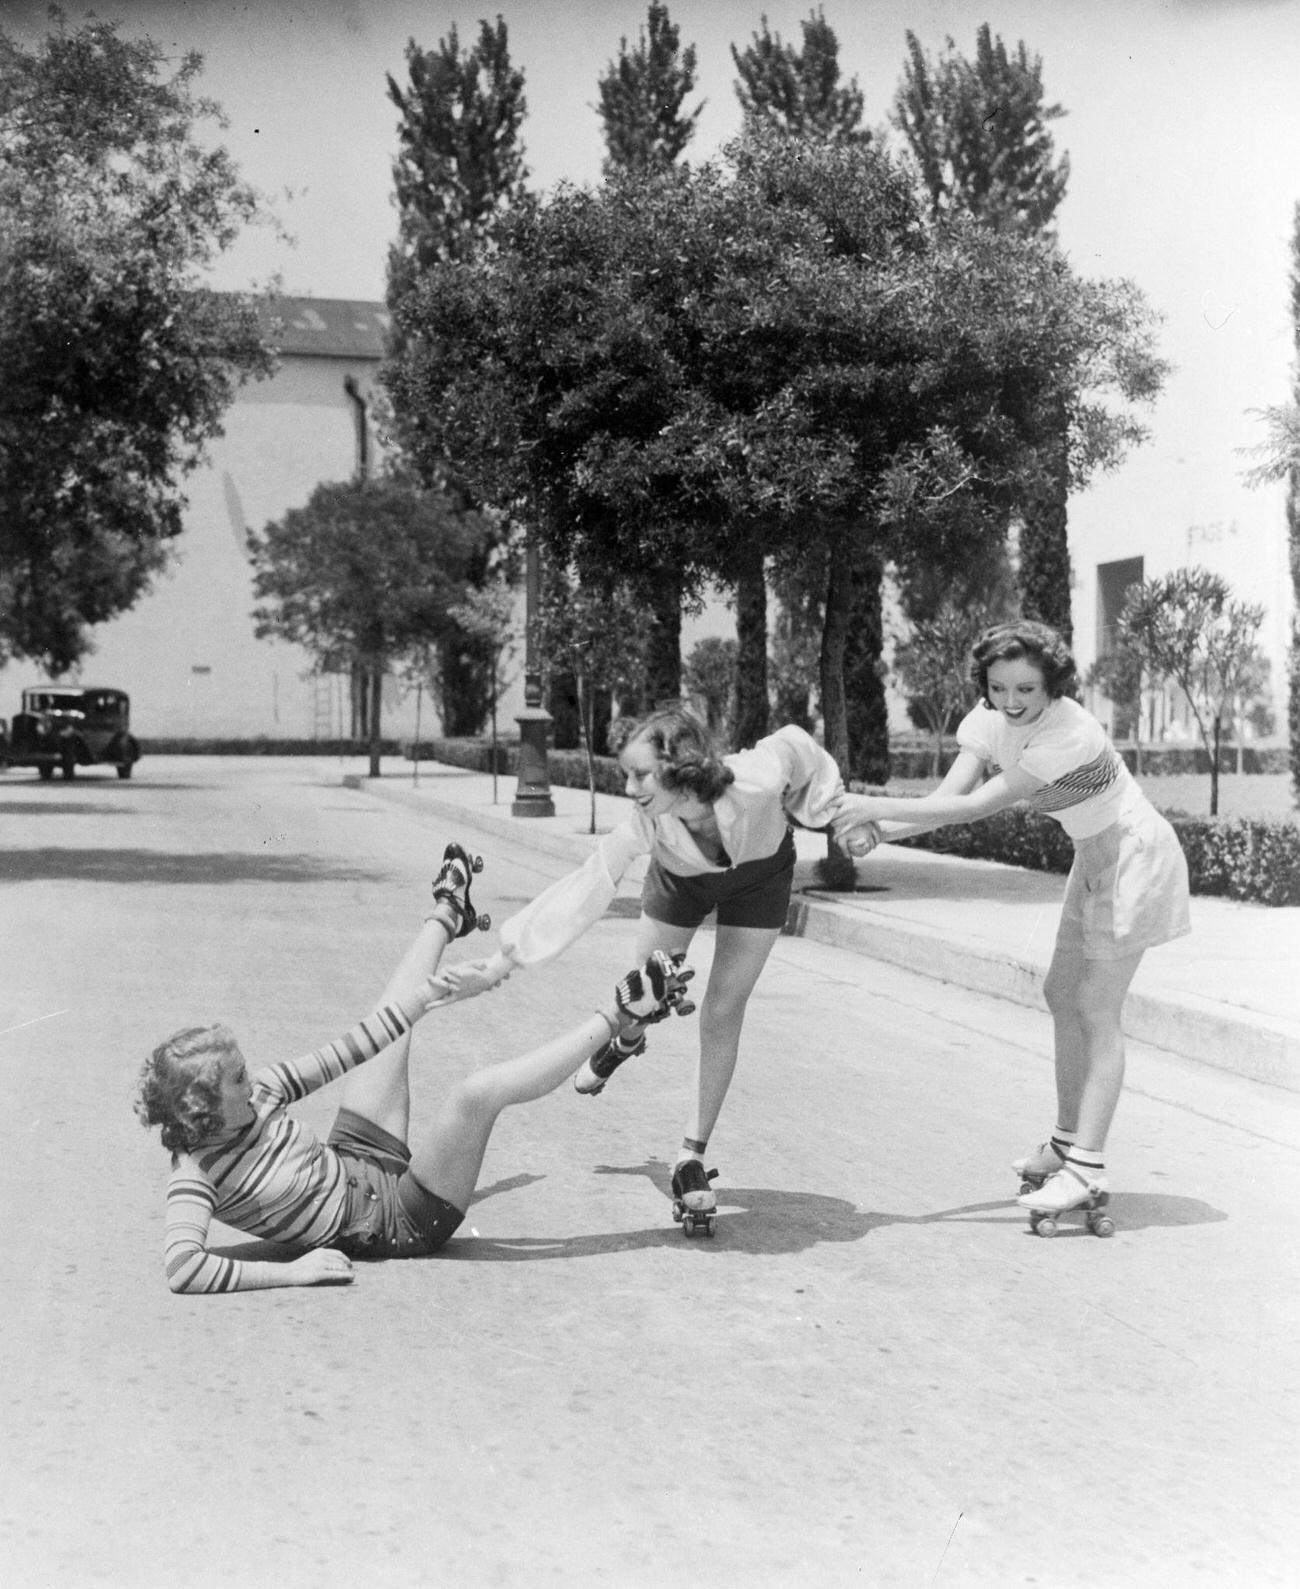 Three Girls Roller Skating, One Being Helped After a Fall, 1933.